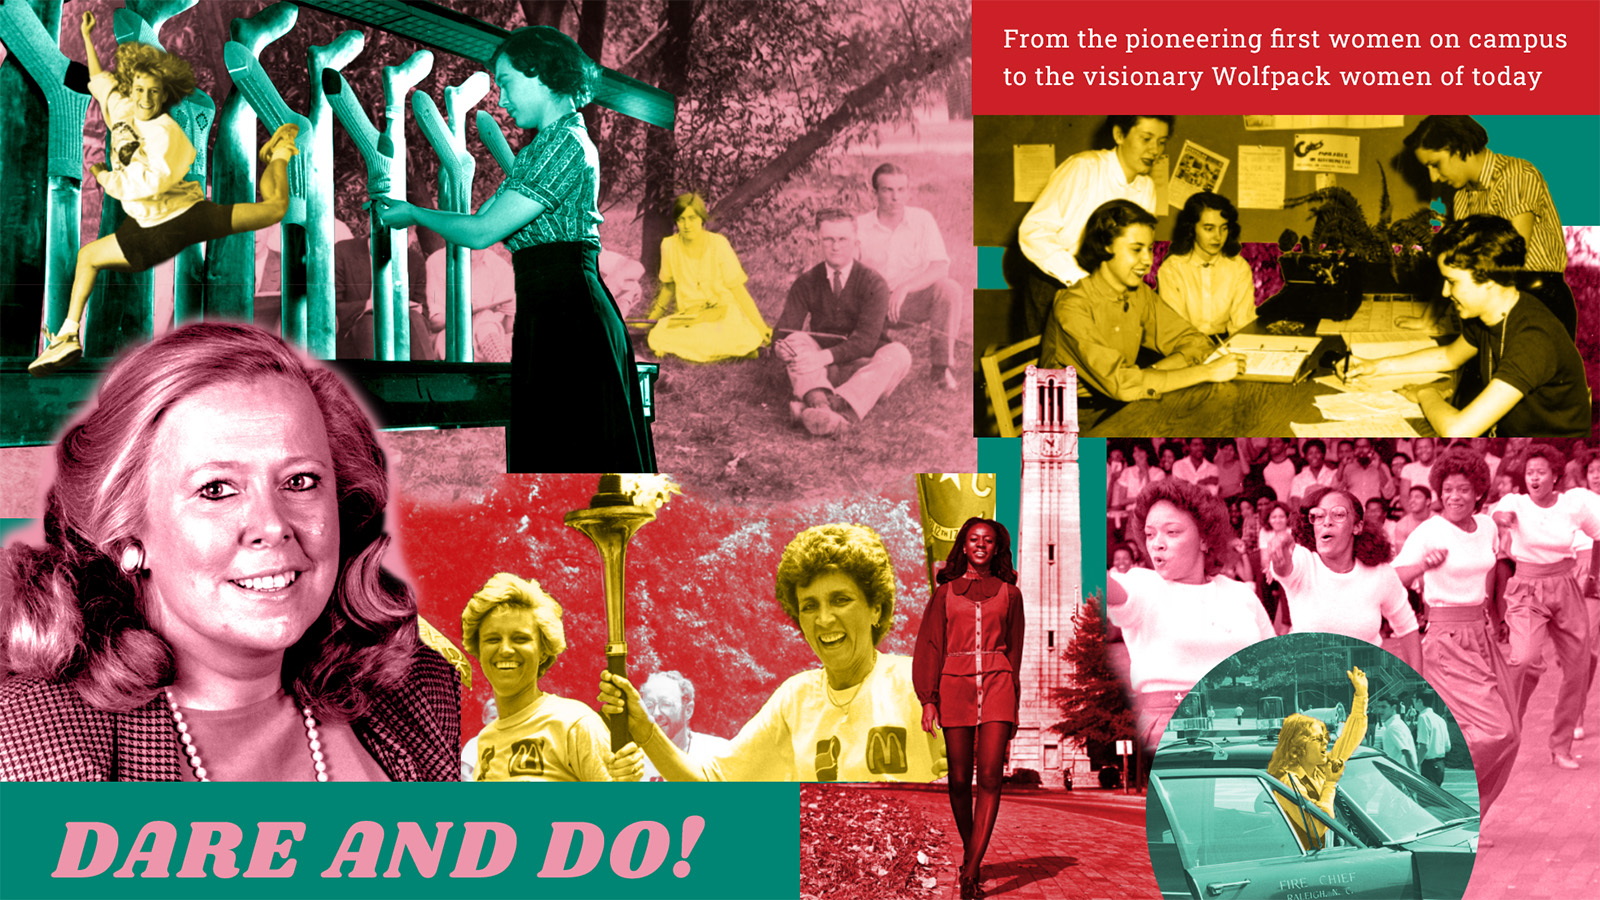 A collage of images of pioneering women at NC State, featured in the Dare and Do! exhibit